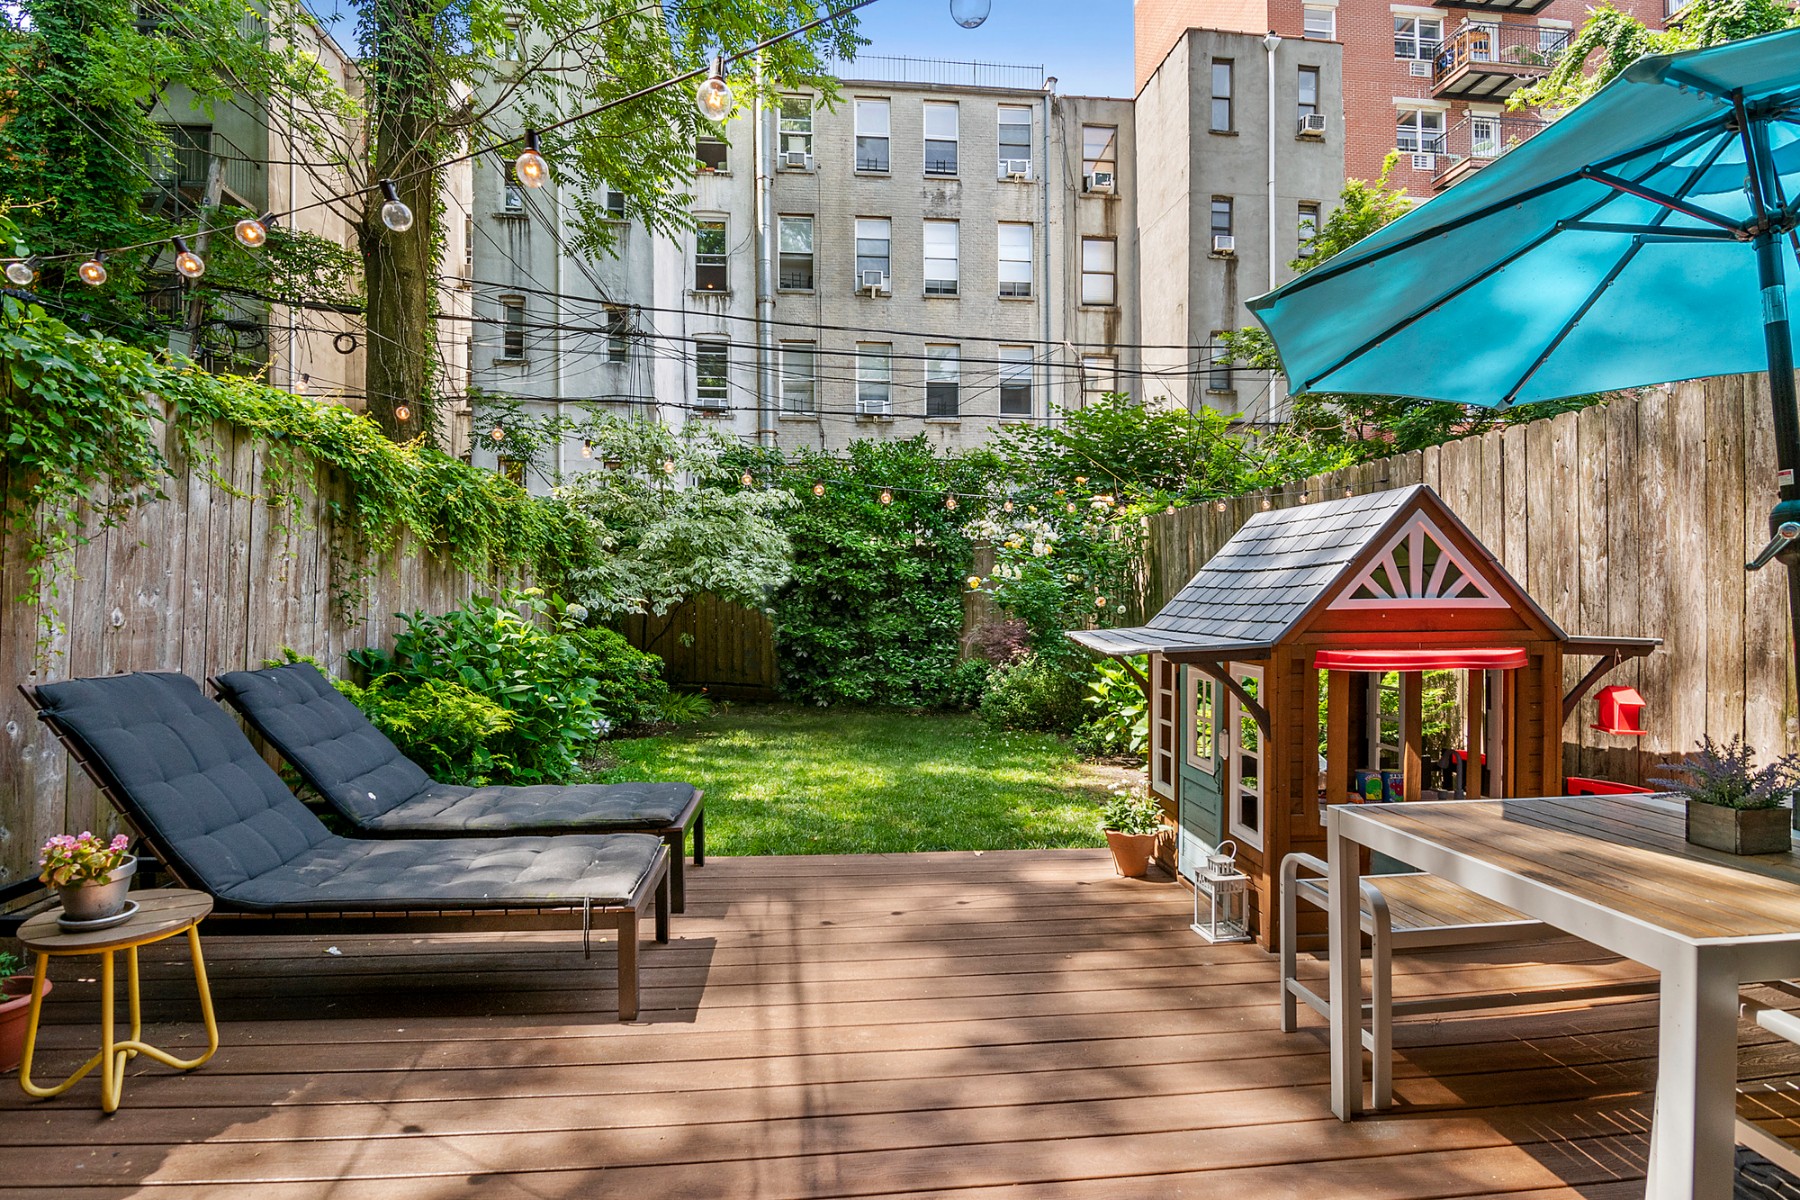 42 St Marks Place 1, Boerum Hill, Brooklyn, New York - 4 Bedrooms  
3 Bathrooms  
12 Rooms - 